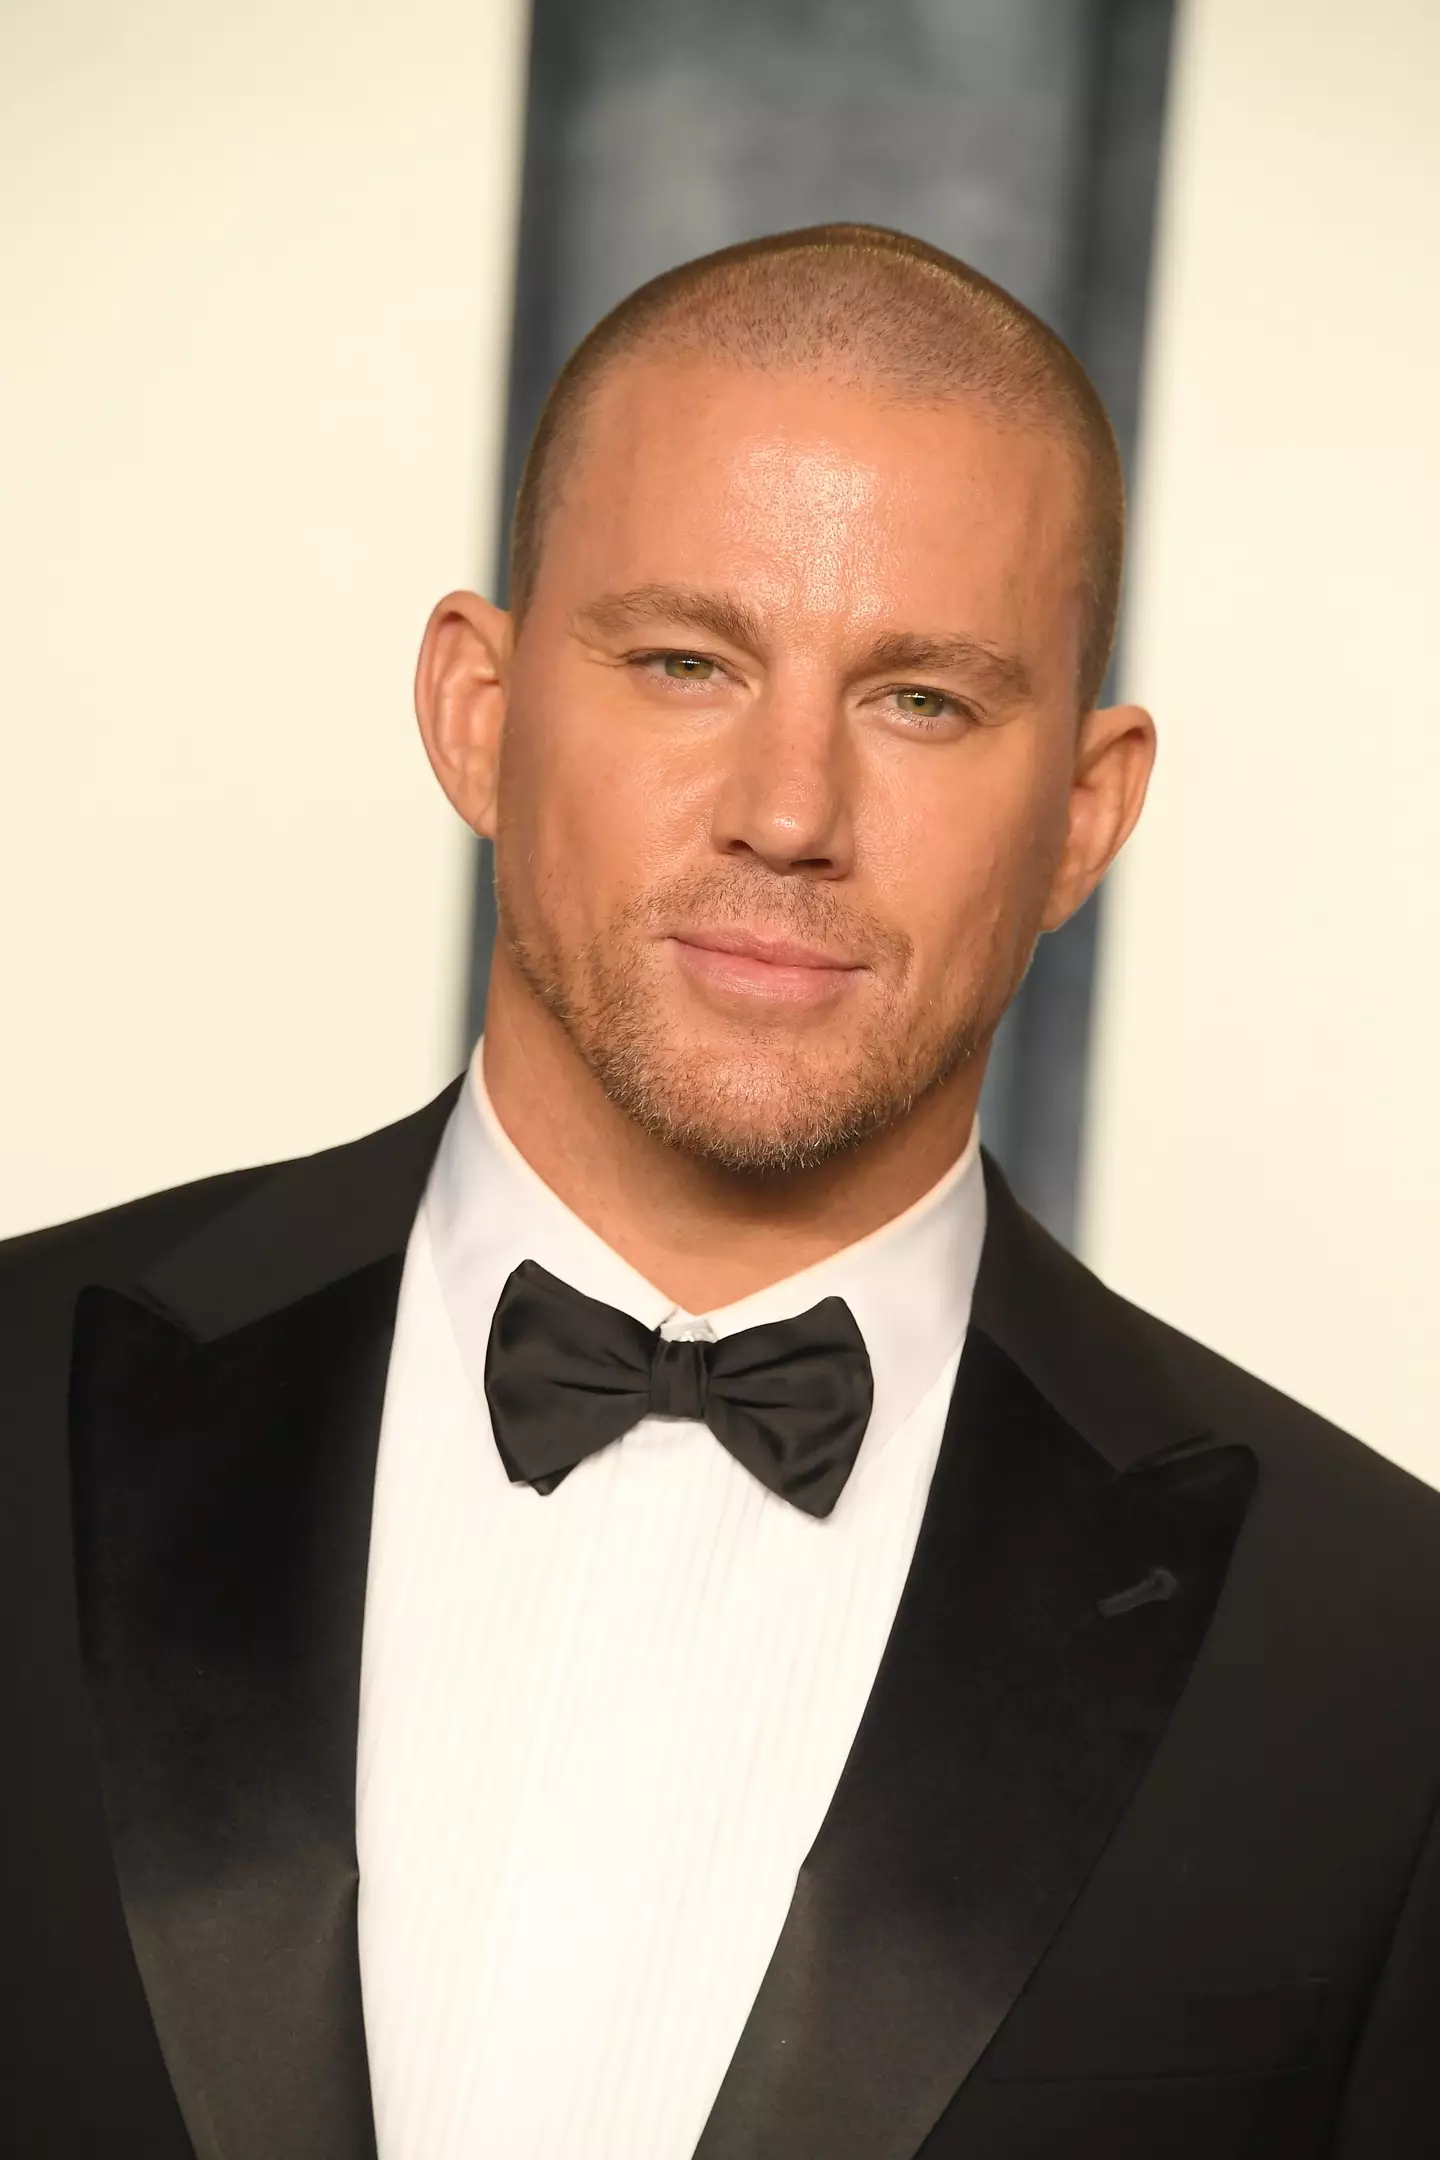 Channing Tatum has denied former wife Jenna Dewan's claims that he tried to hide 'Magic Mike' millions from her. (Steve Granitz/FilmMagic/Getty)